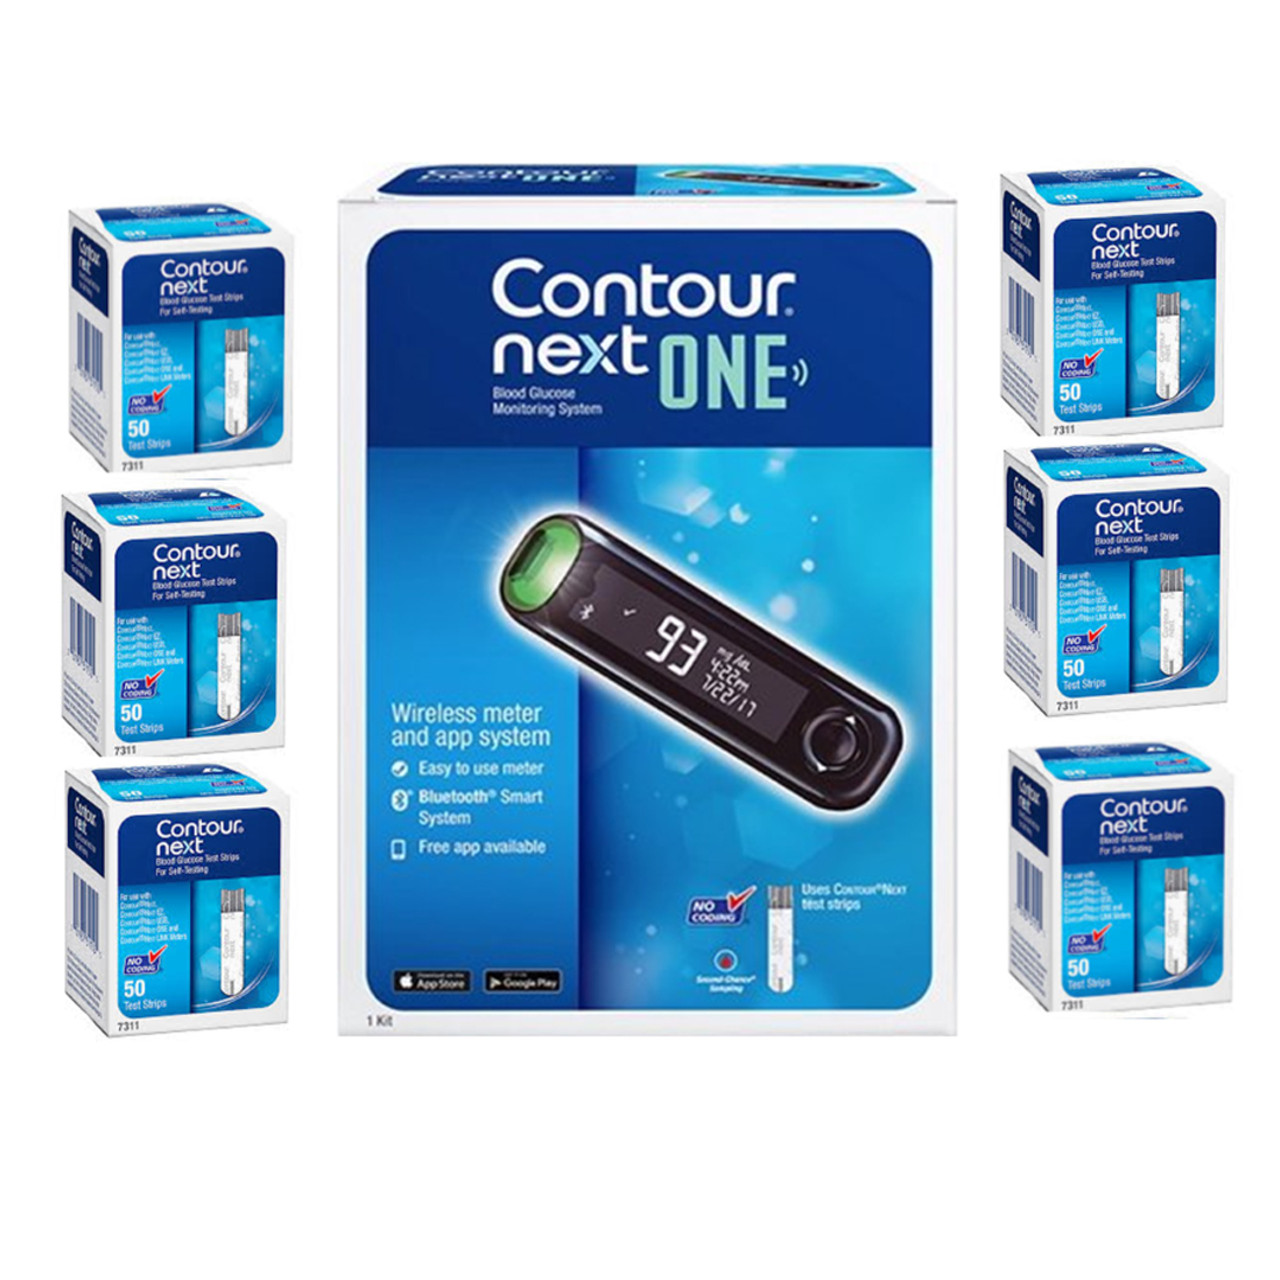 Ascensia Bayer Contour Next One Meter Only for Glucose Care